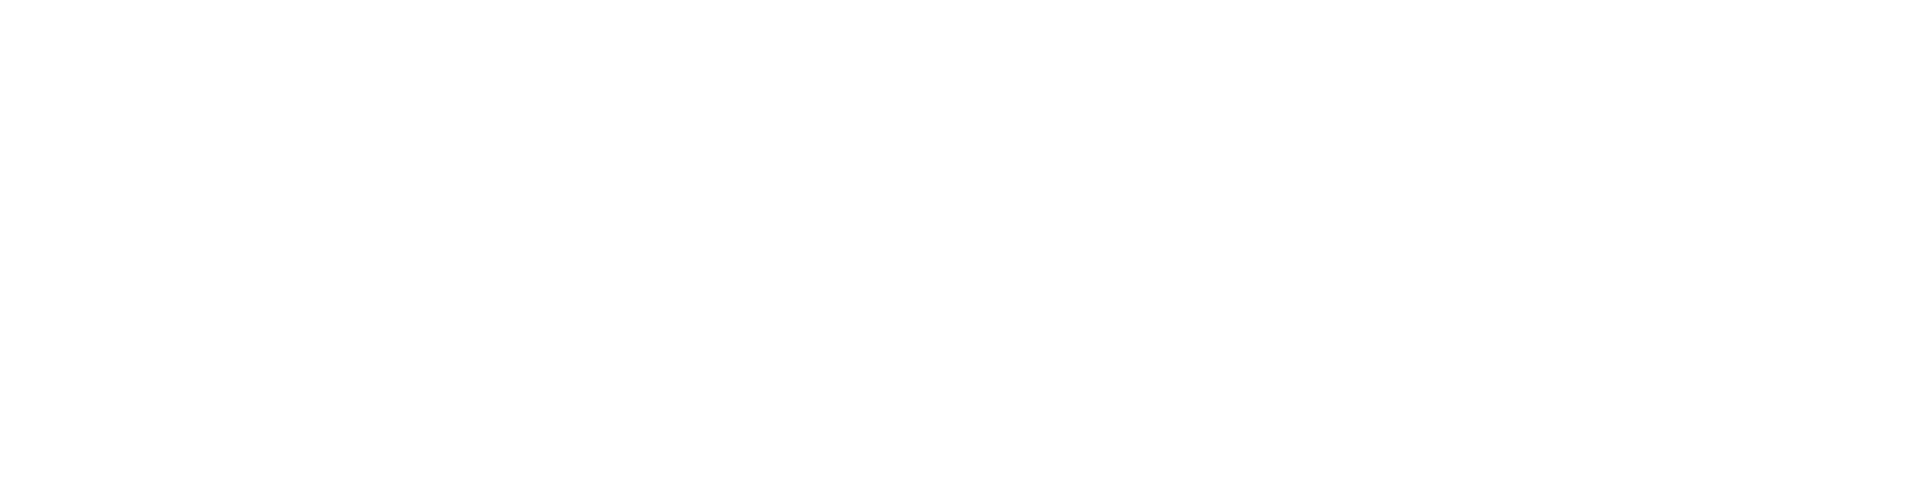 The Scuffed Series 3 - Bullets & Gravity